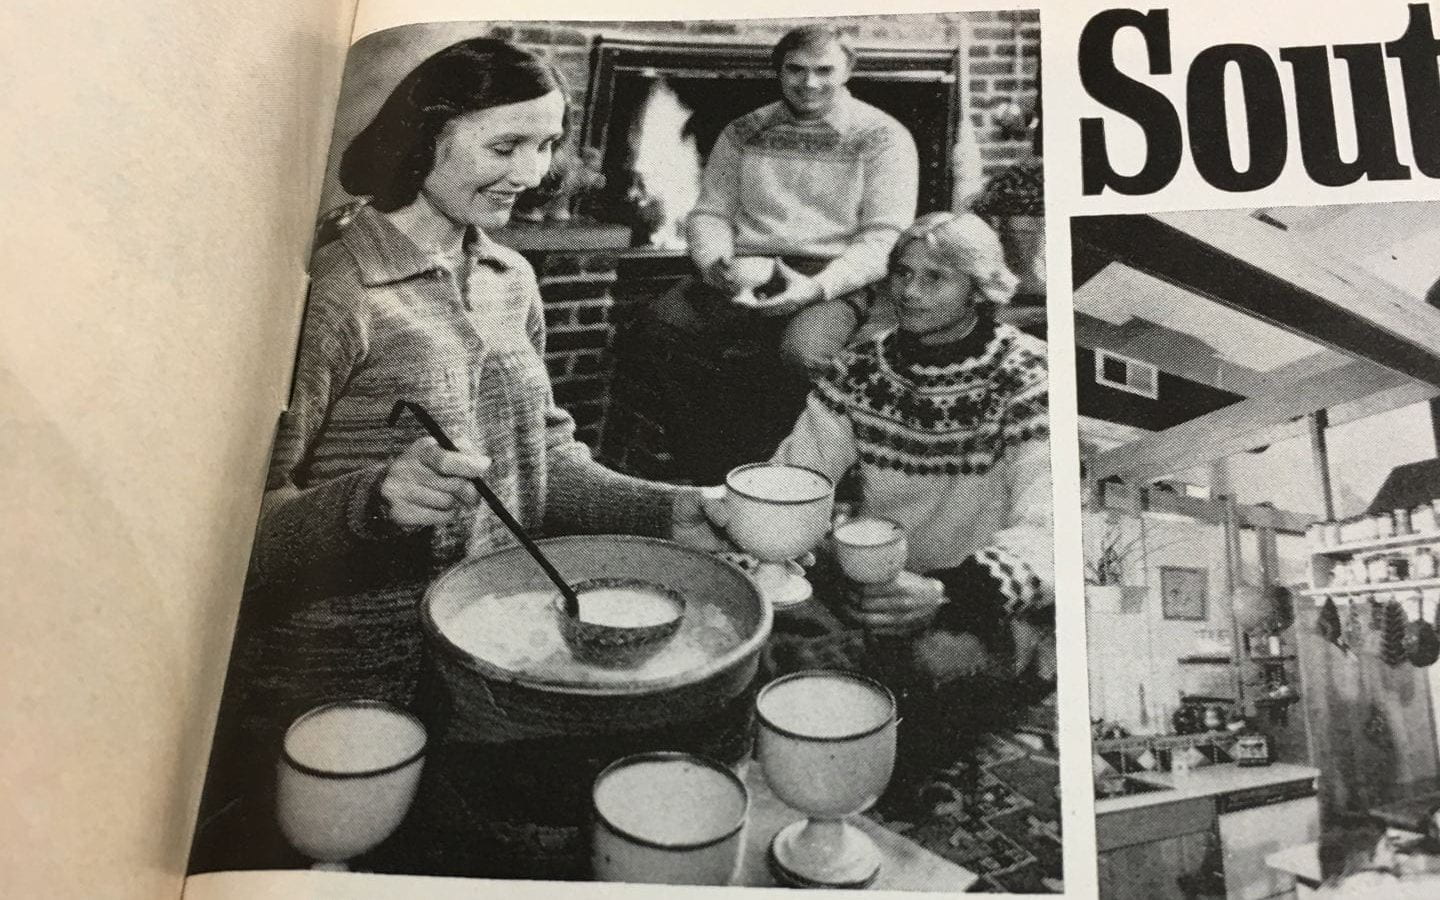 A white woman dressed in 1970s fashion services soup to two white men. All are smiling. 